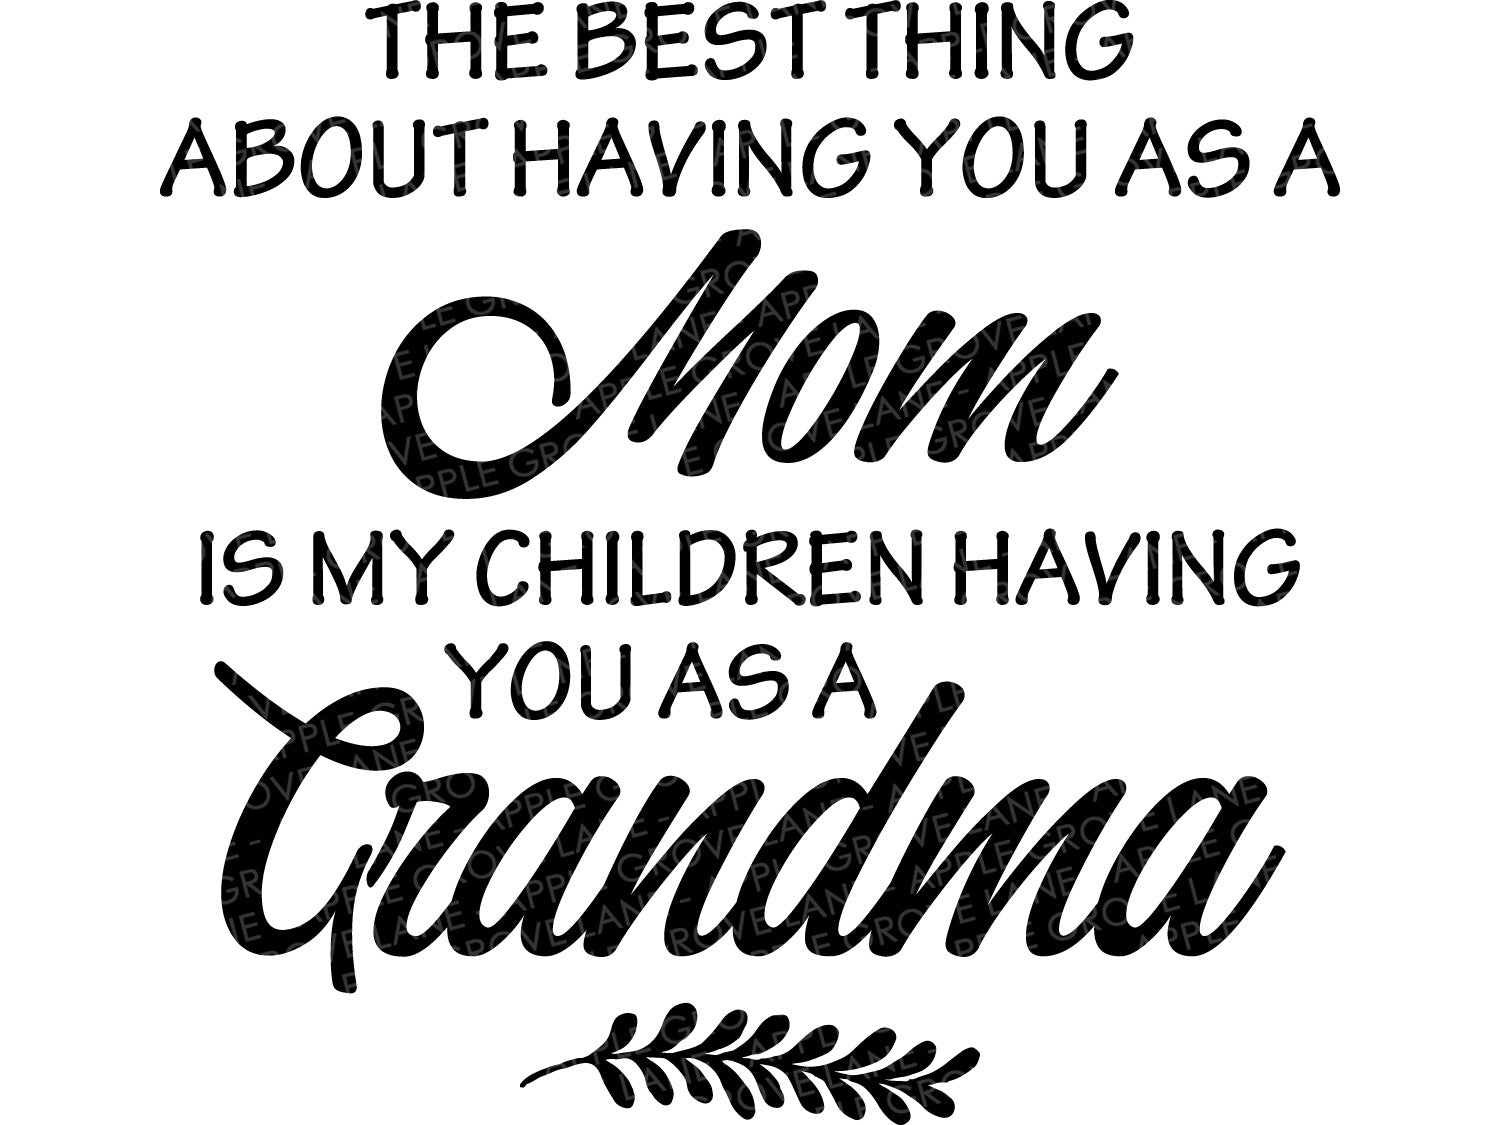 Download Grandma Svg Mother S Day Svg Best Thing Svg Having You As Mom Sv Apple Grove Lane